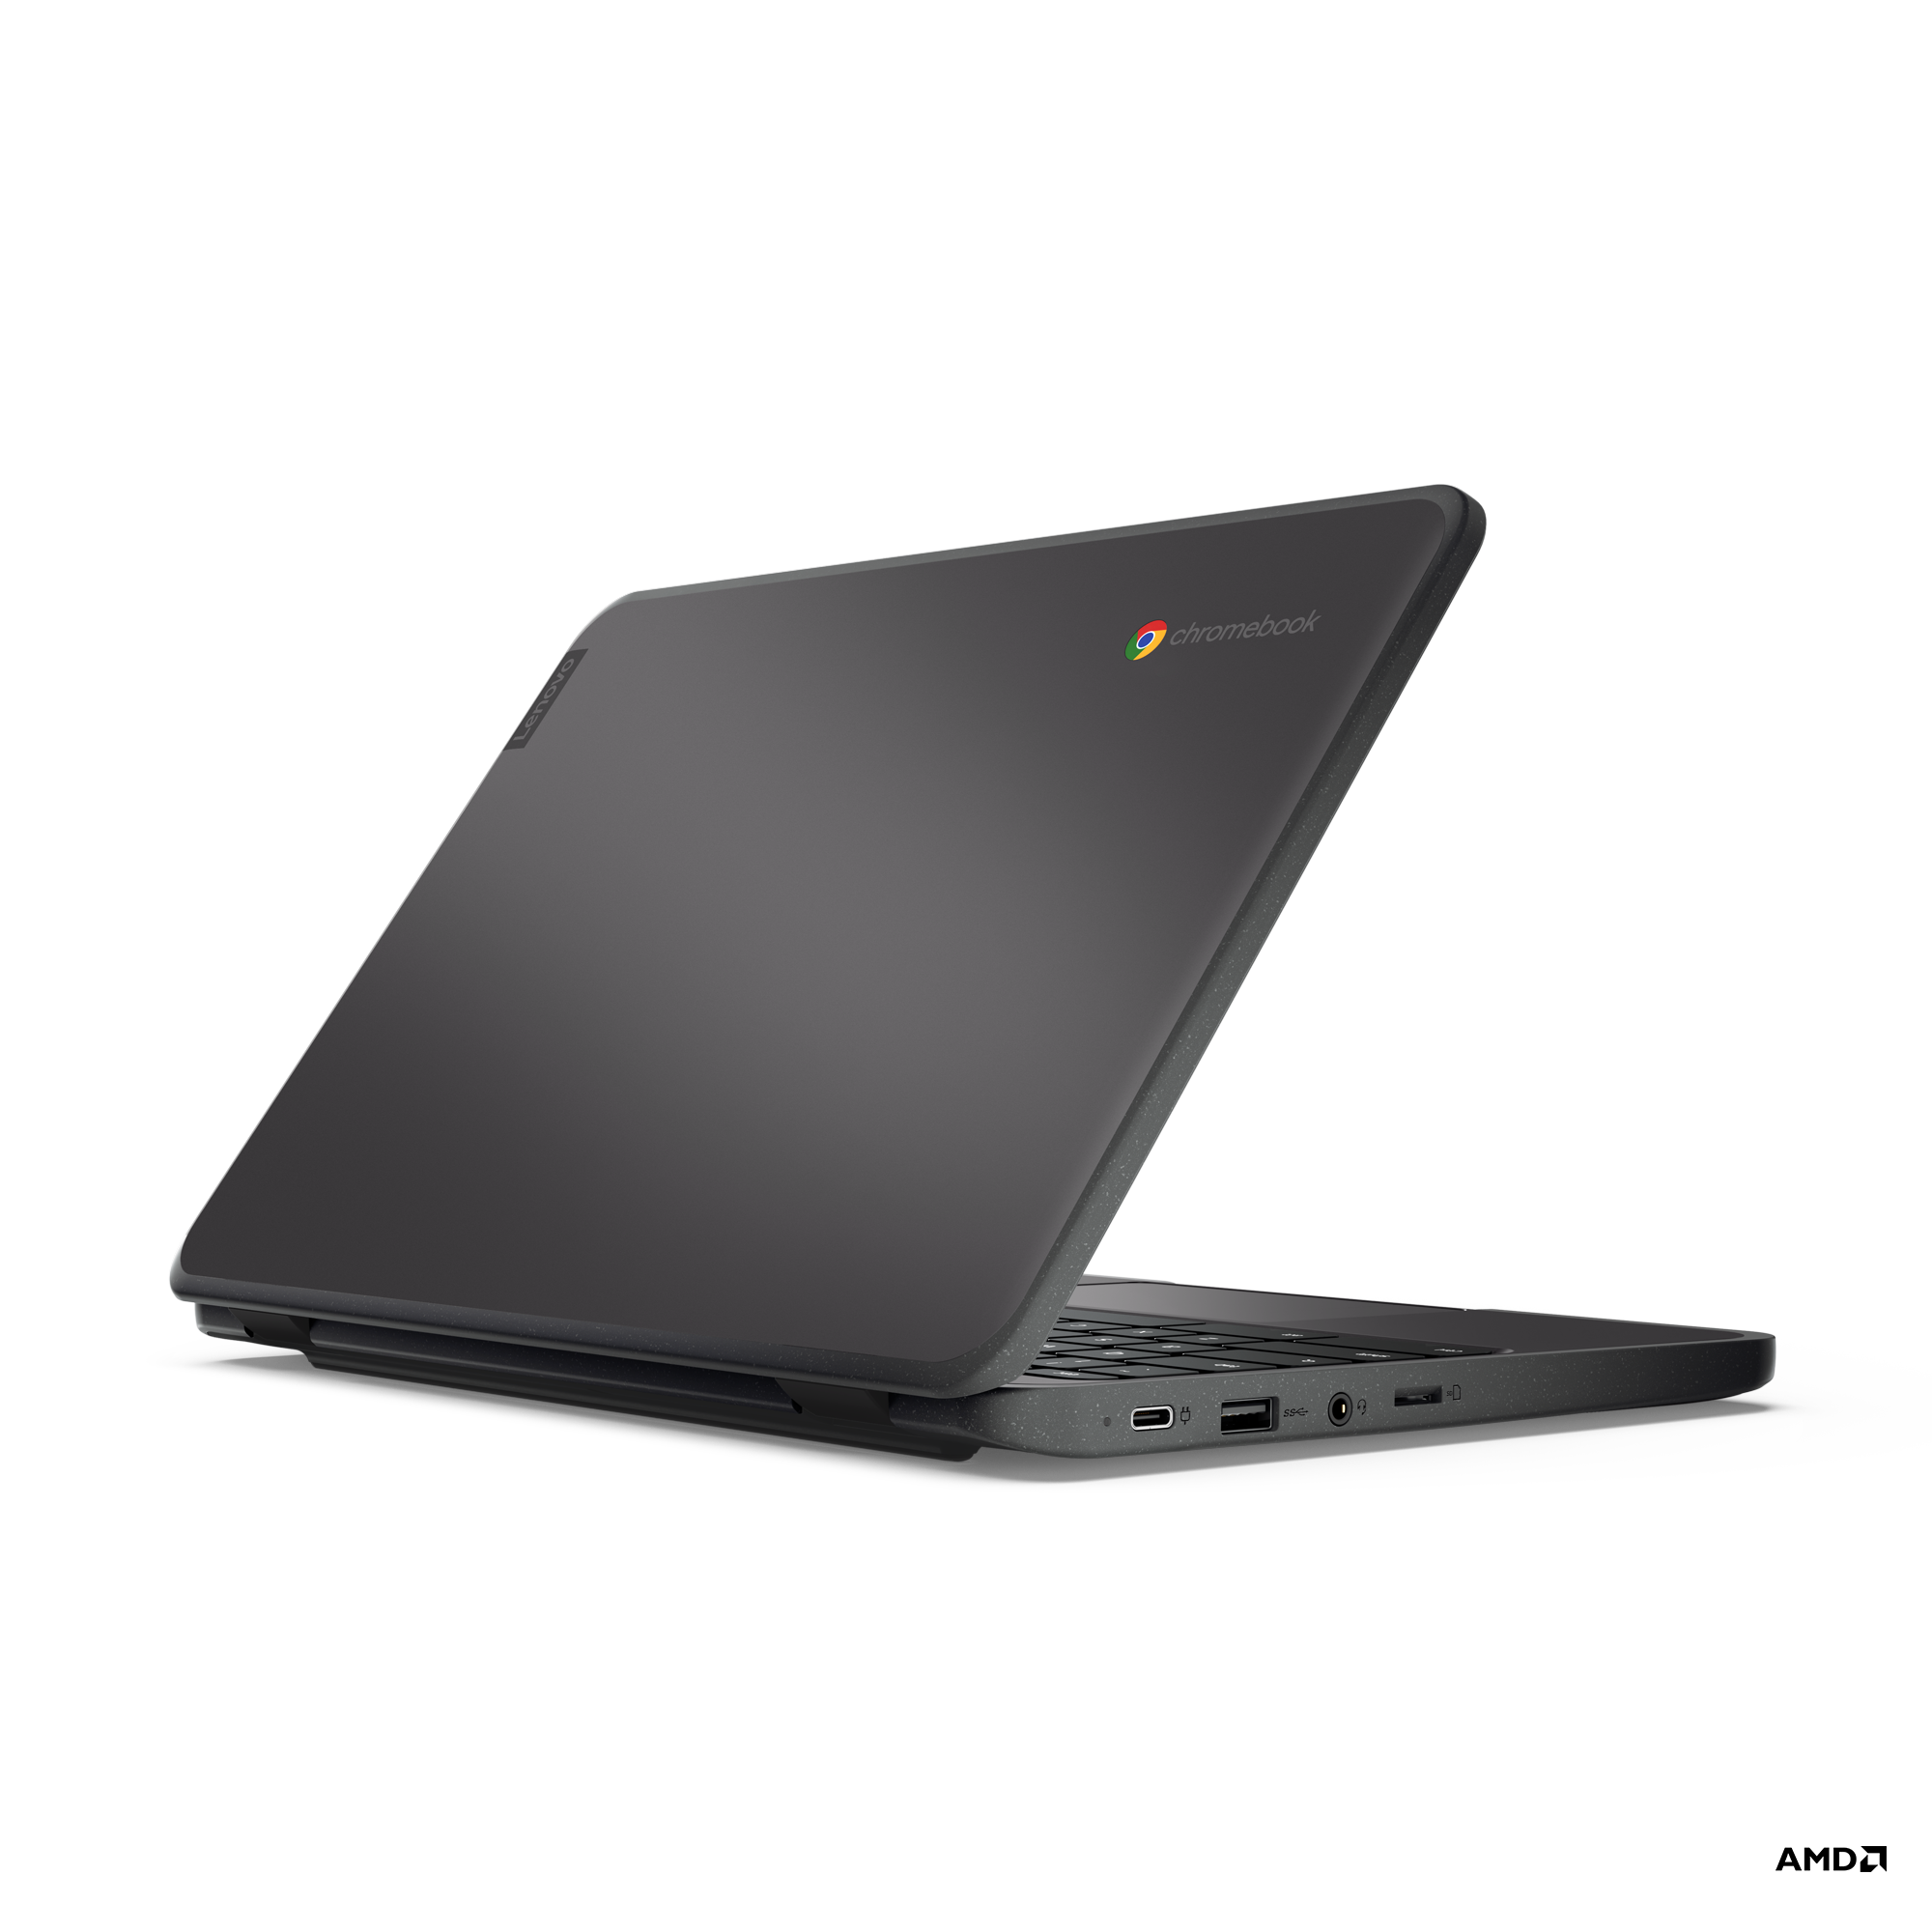 Lenovo launches new Chromebooks aimed at education - 9to5Google